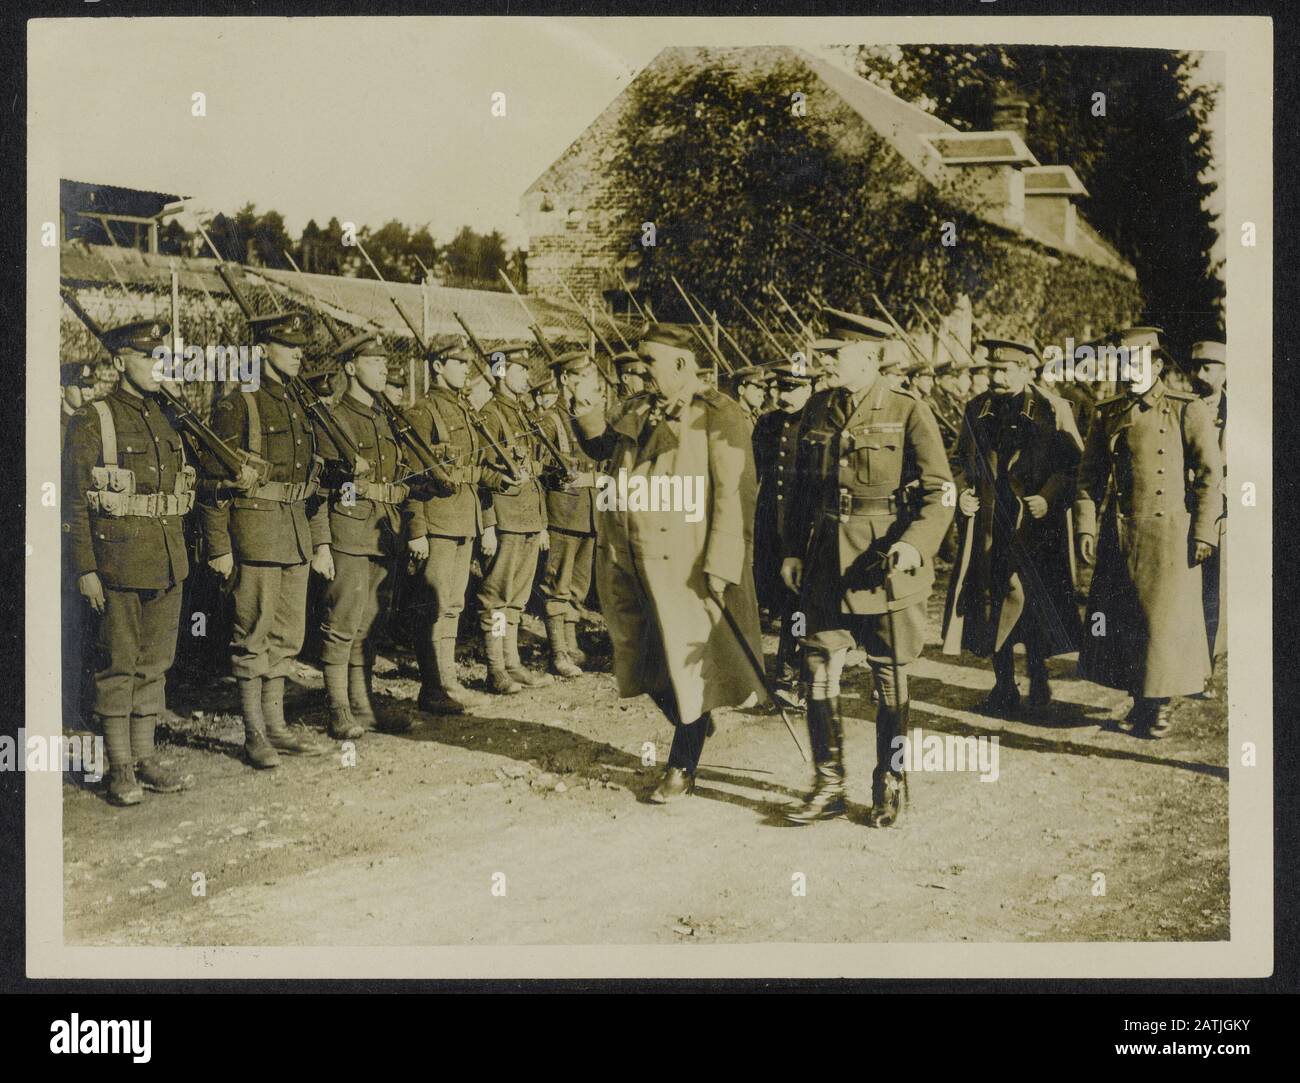 The Western Front Description: King of Montenegro and the Commander-in-Chief inspecting the Guard of Honor Annotation: The Western Front. King Nicholas I of Montenegro [1841-1921] and the British Army Commander, Sir Douglas Haig, inspect Eregarde Date: {1914-1918} Location: France Keywords: WWI, eregardes fronts, army chiefs, dynasties Person Name: Haig, Douglas, Nicholas I, king of Montenegro Stock Photo